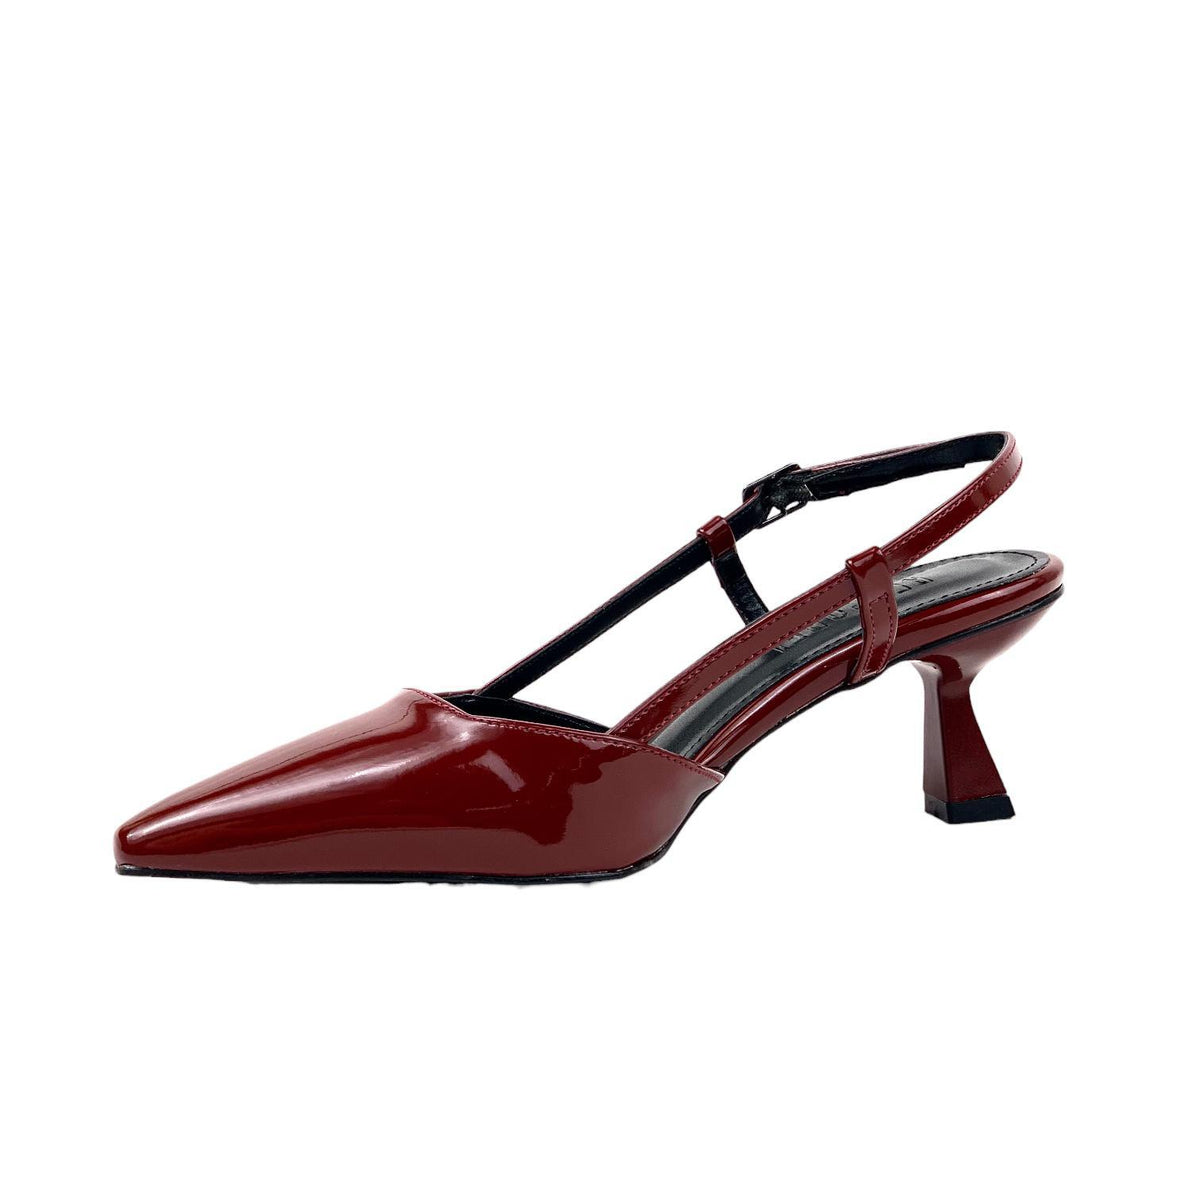 Women's Sedj Burgundy Patent Leather Material Open Back Almond Heel Shoes 5.5 Cm - STREETMODE™